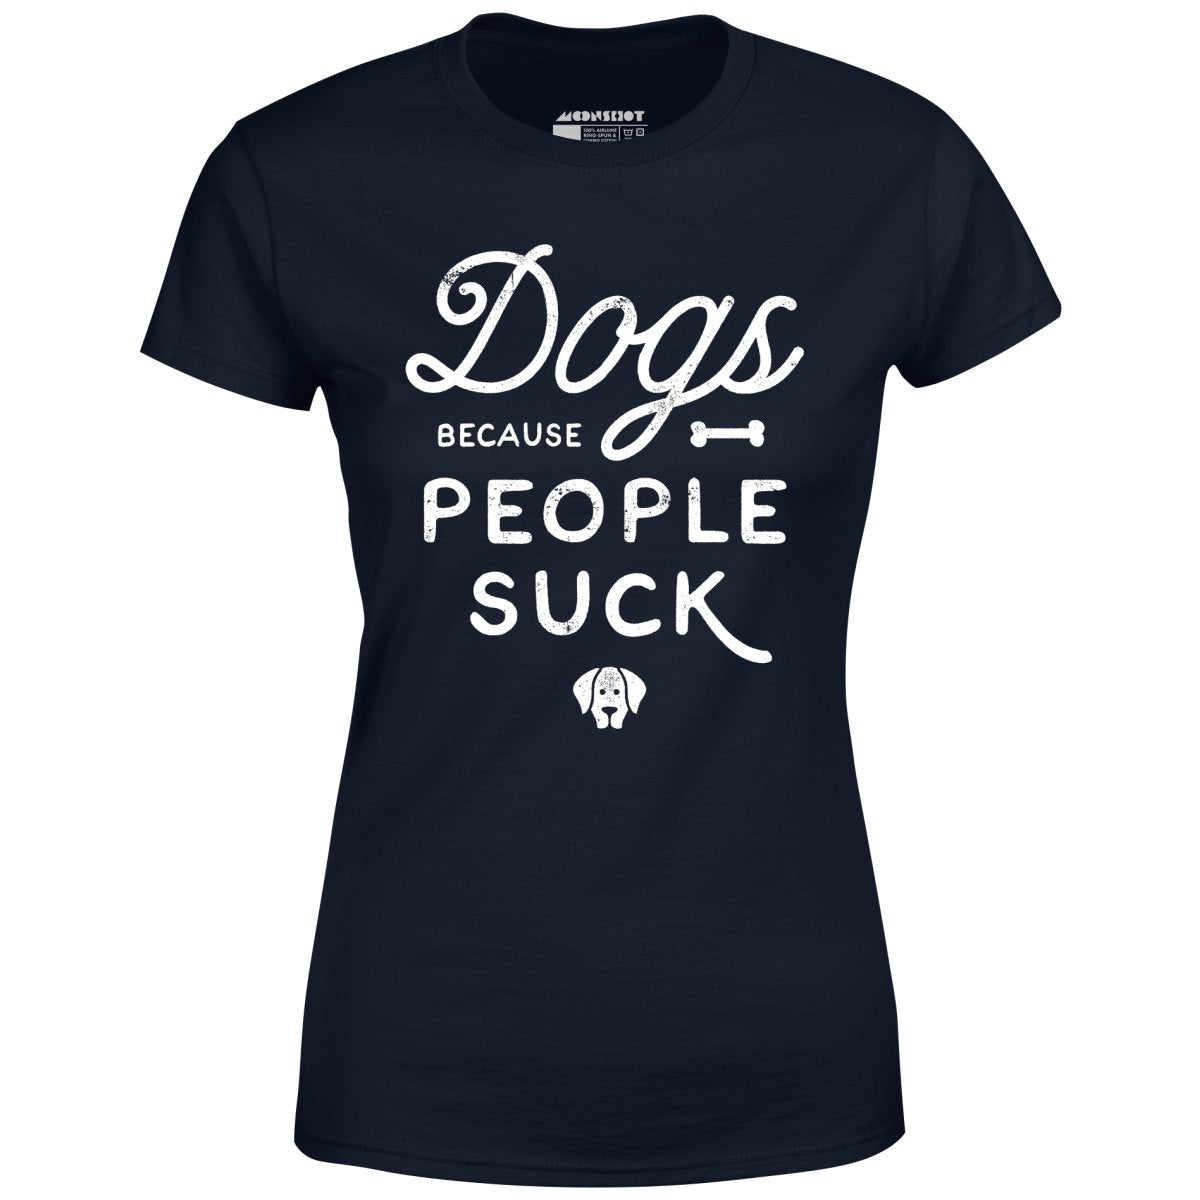 Dogs Because People Suck - Women's T-Shirt